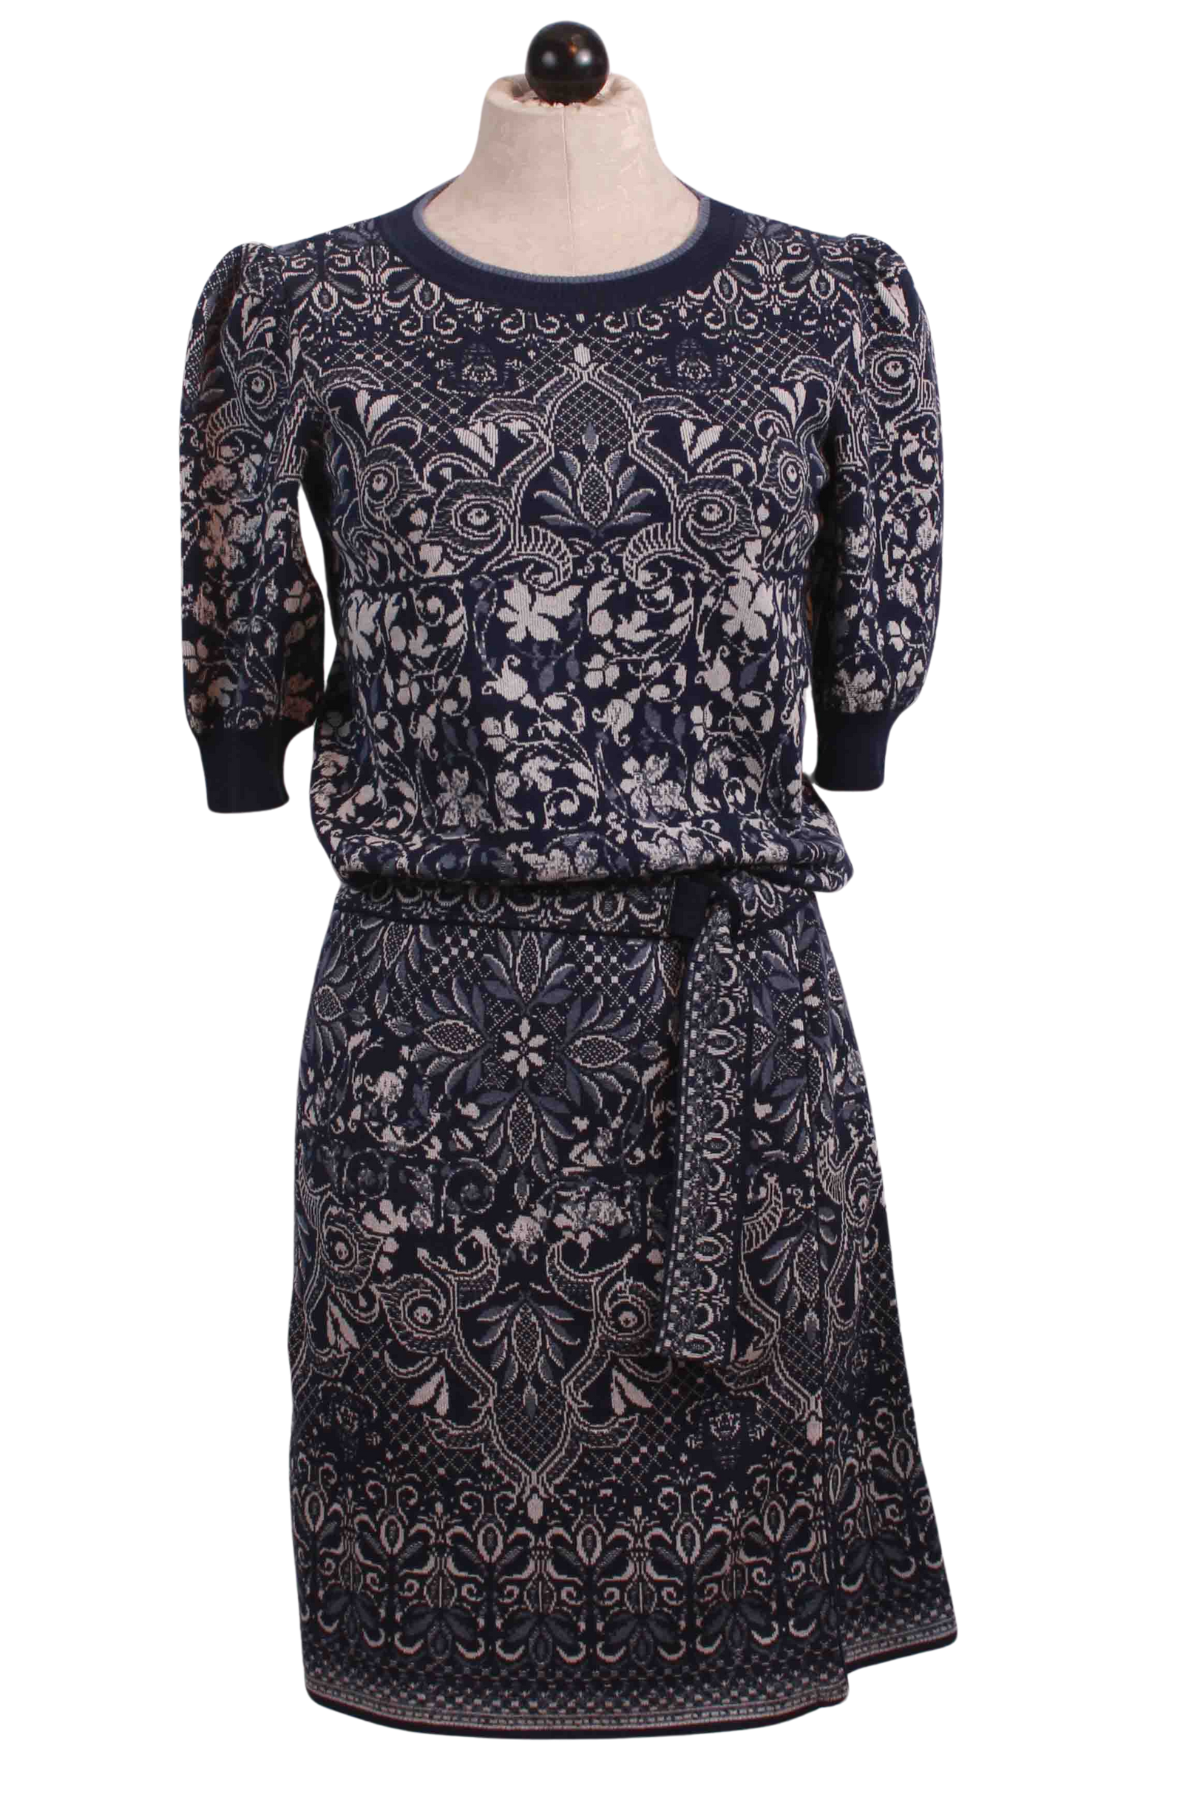 Marine Short Sleeve Alhambra Pattern Jacquard Pullover by Ivko paired with the matching Alhambra skirt